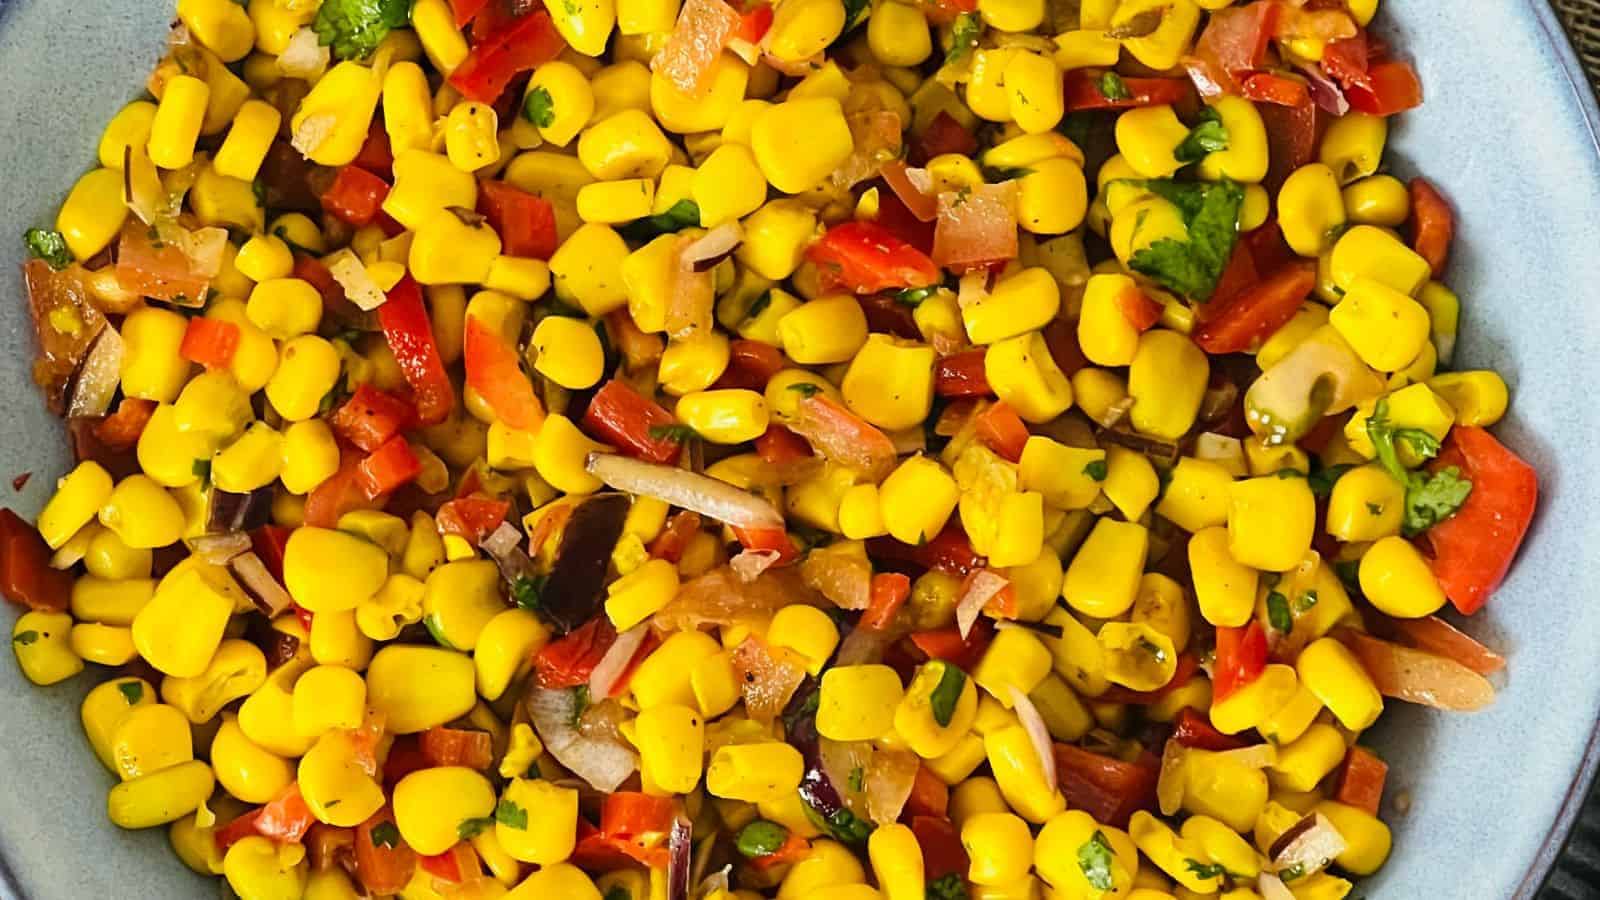 A close-up of a bowl filled with corn salad, featuring yellow corn kernels mixed with diced red bell peppers, onions, and herbs.